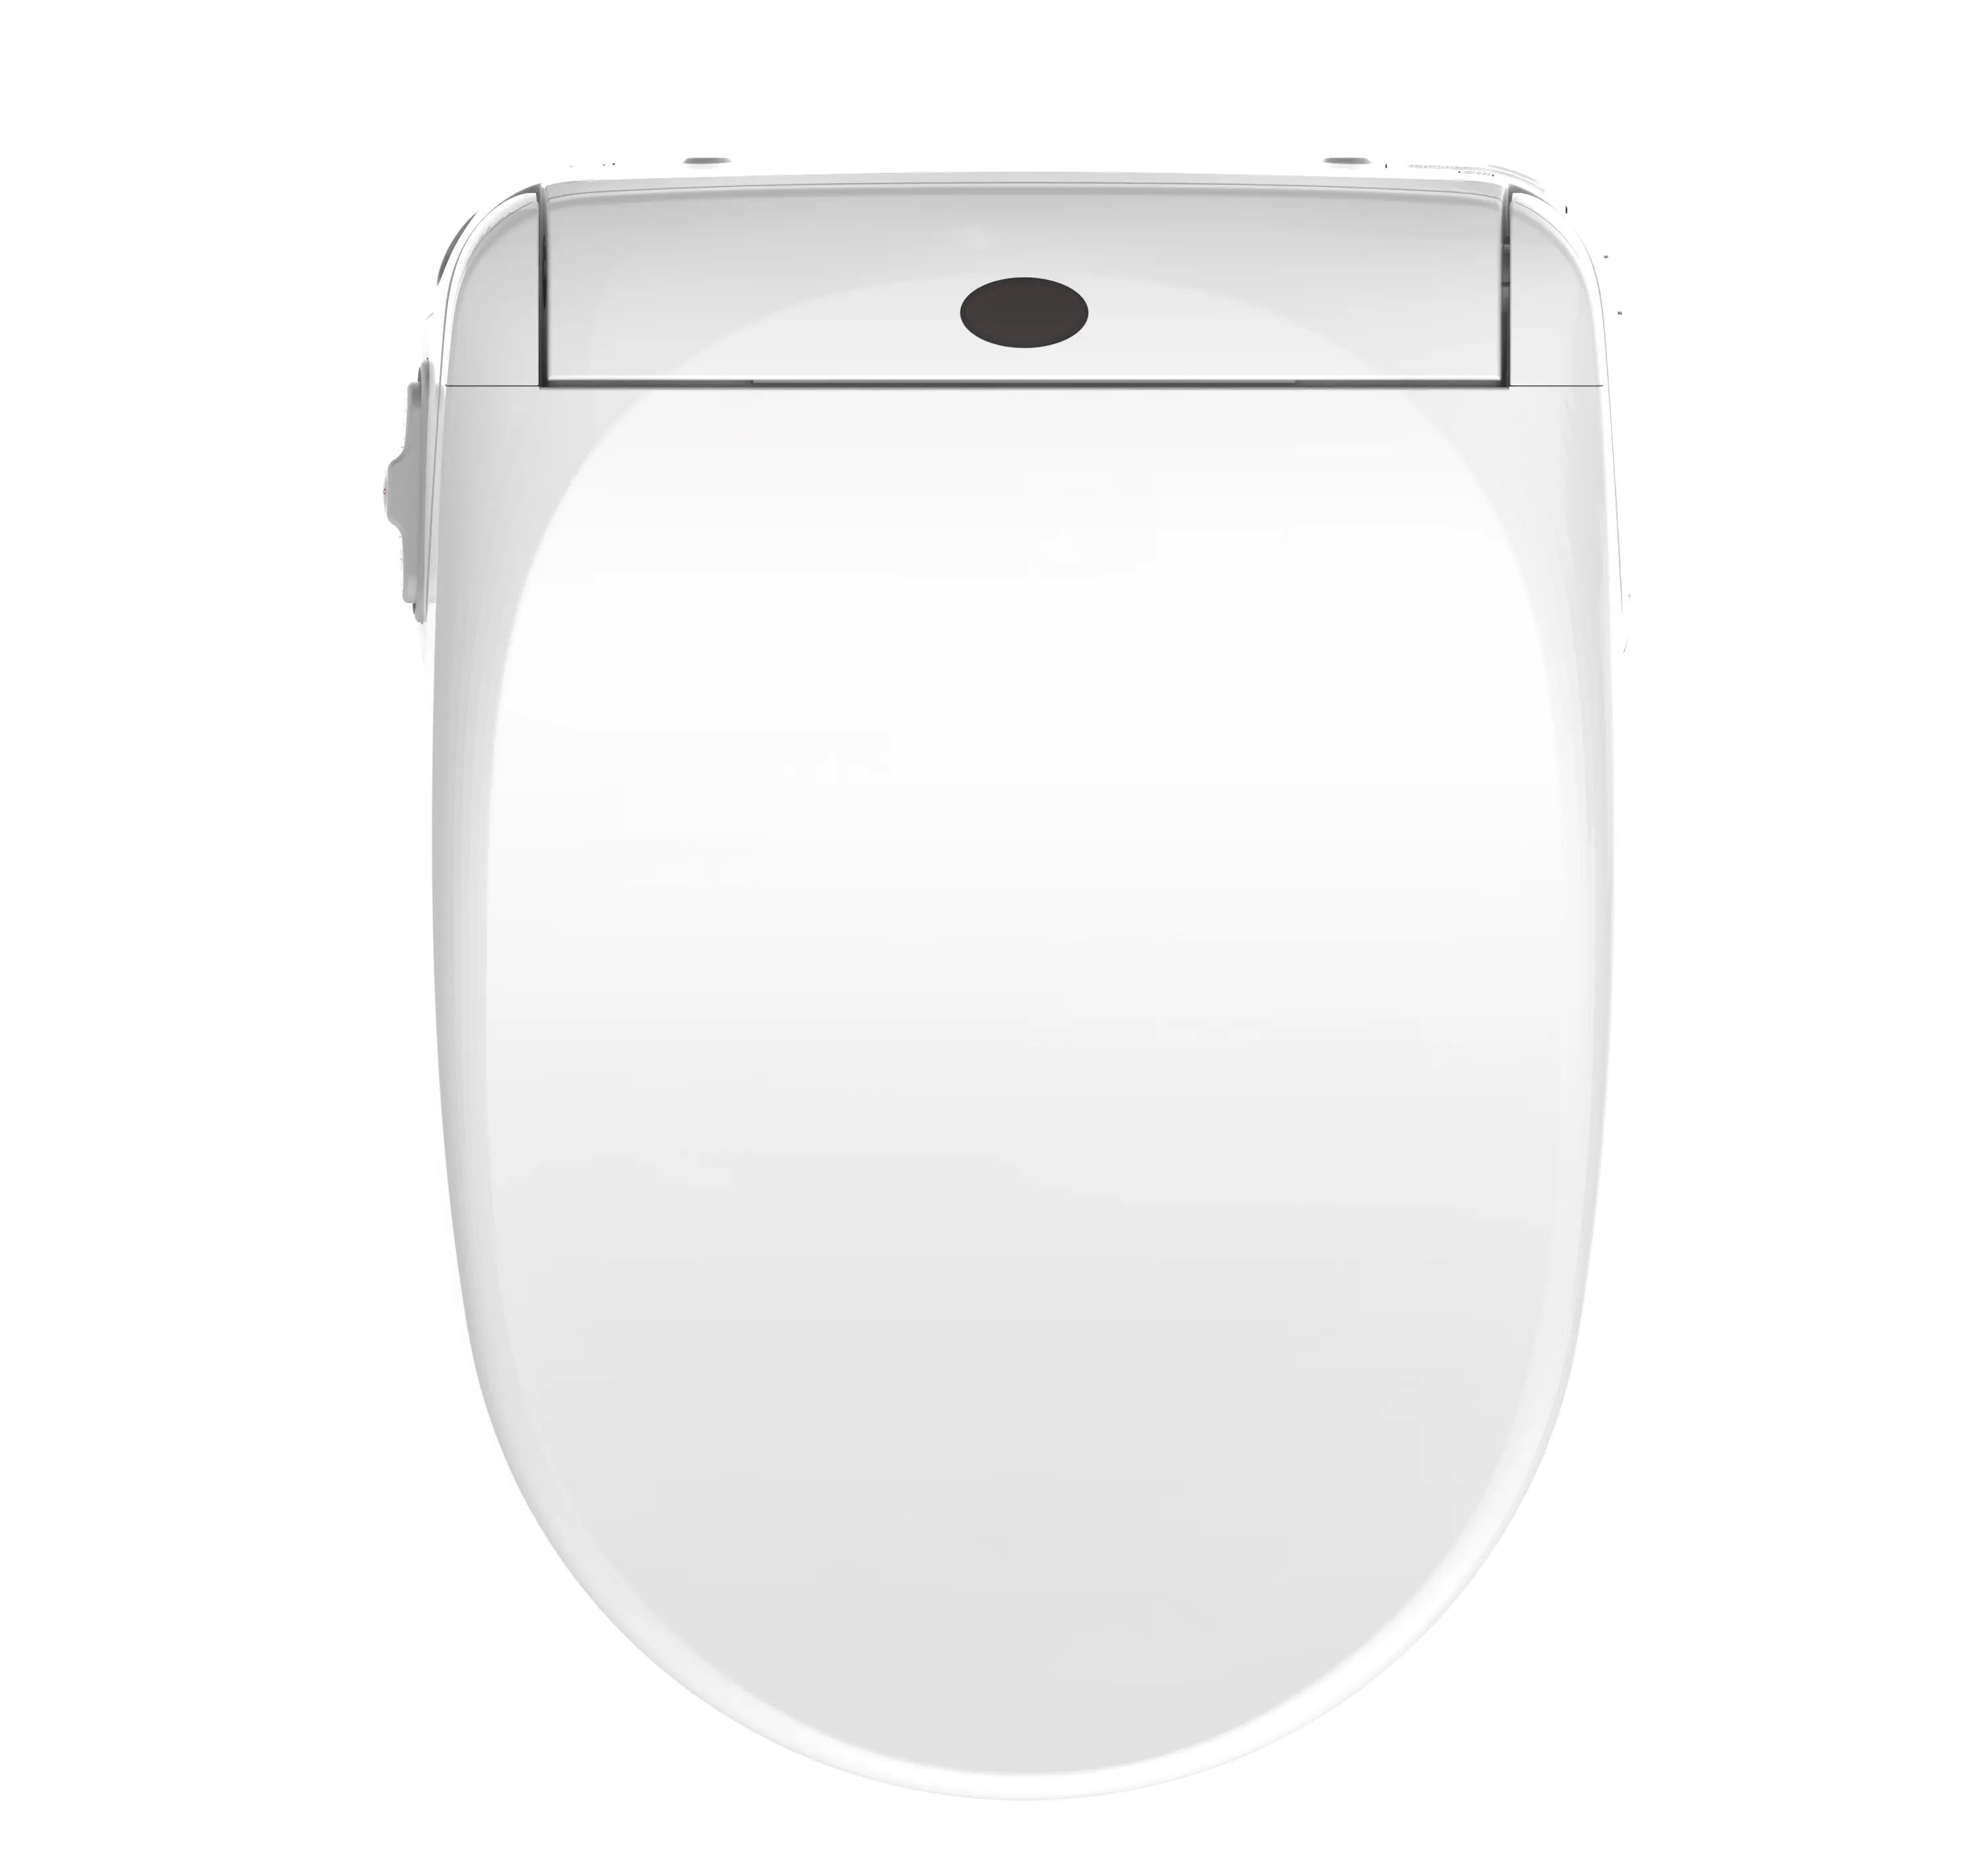 TC-B01 Home Electric Automatic Self-Clean Smart Toilet Seat